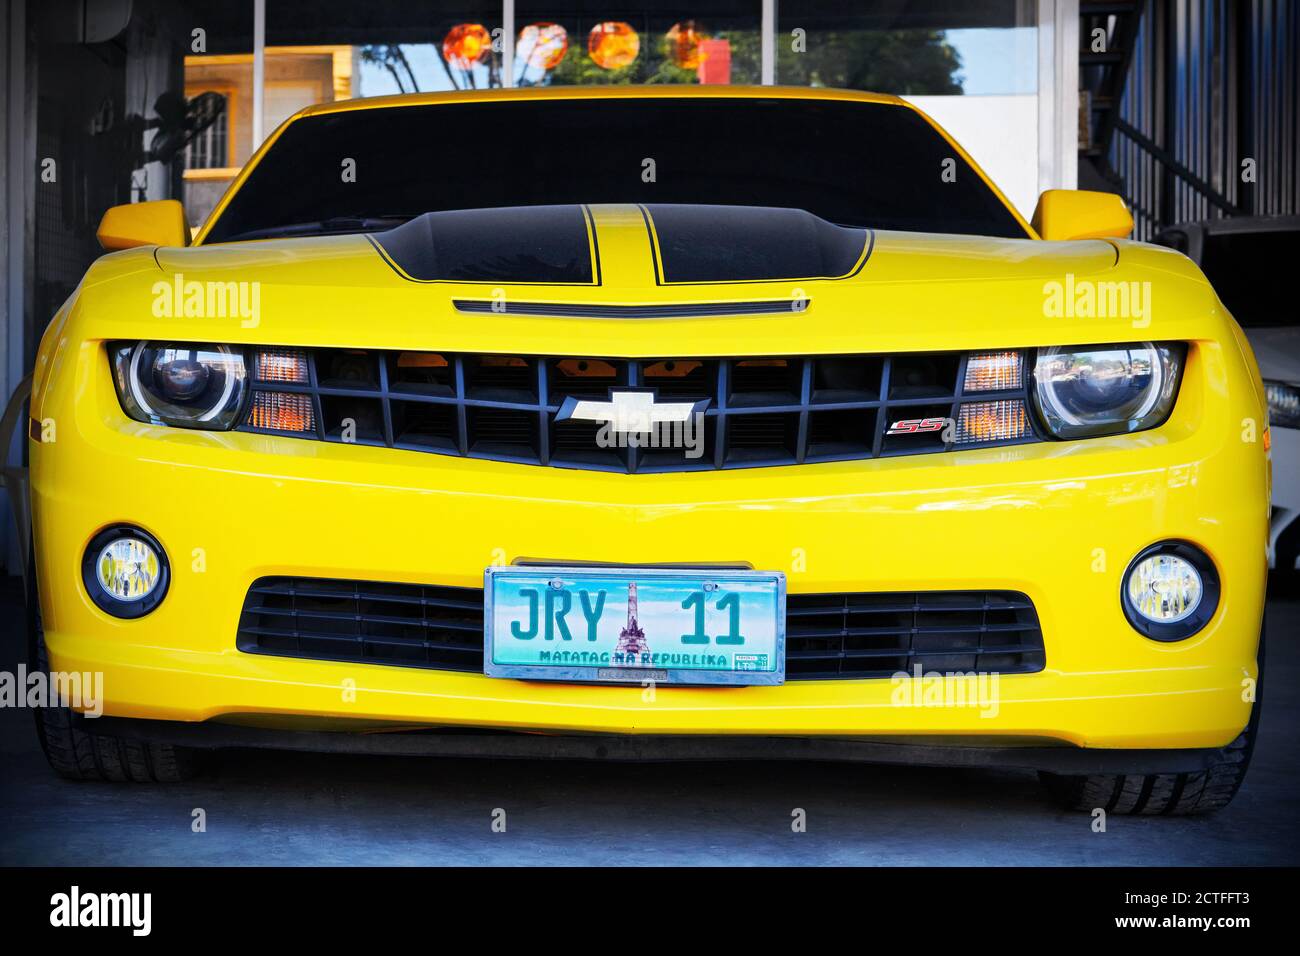 Isolated front view of a new powerful looking black and yellow Chevrolet Camaro sports car parking along the road in Iloilo city, Philippines, Asia Stock Photo